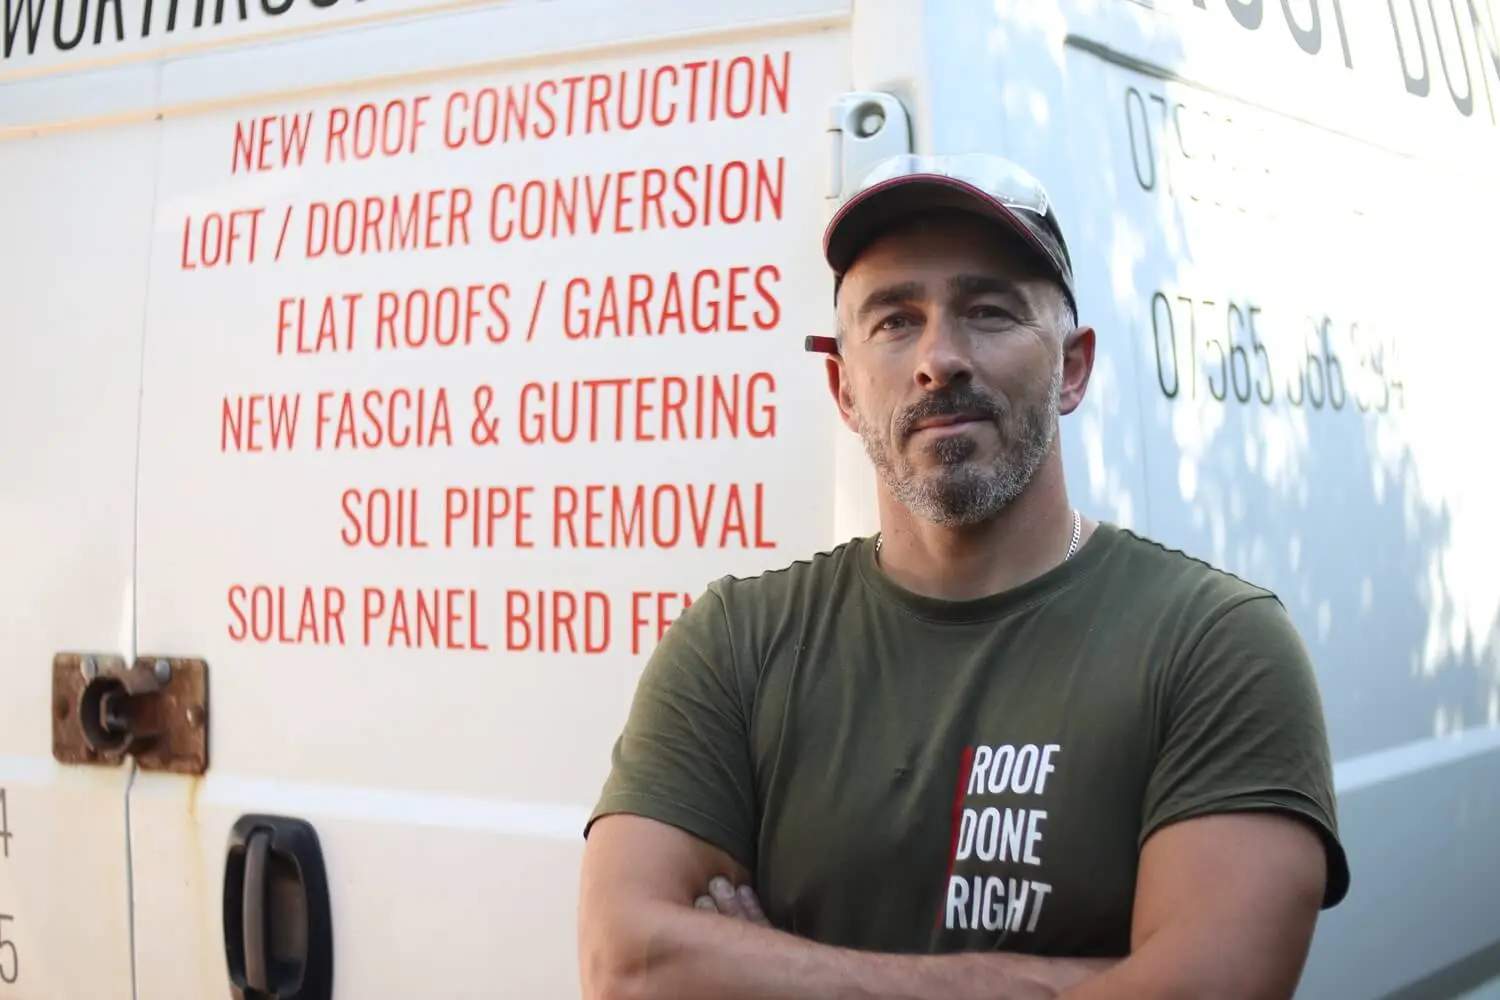 Roofing Company Director Lukas Standing next to the truck